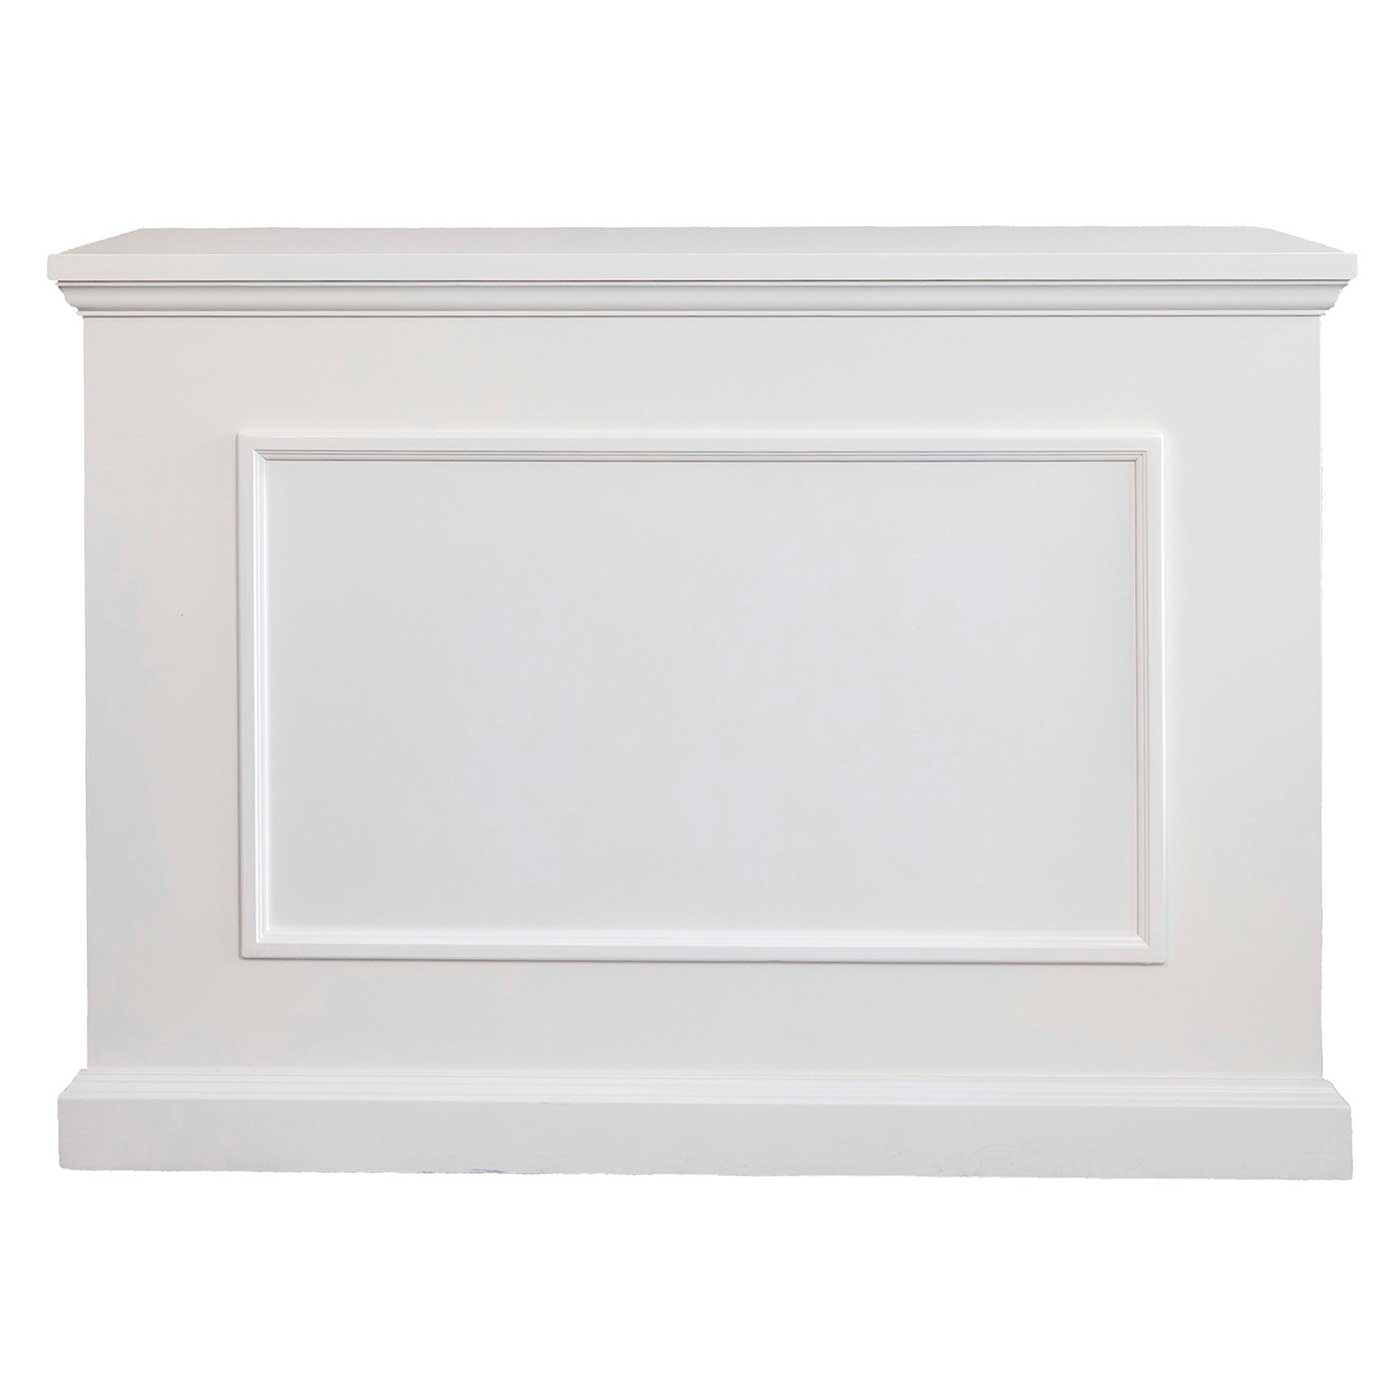 Touchstone Elevate 72015 TV Lift Cabinet in White wood finish pictured from the front.